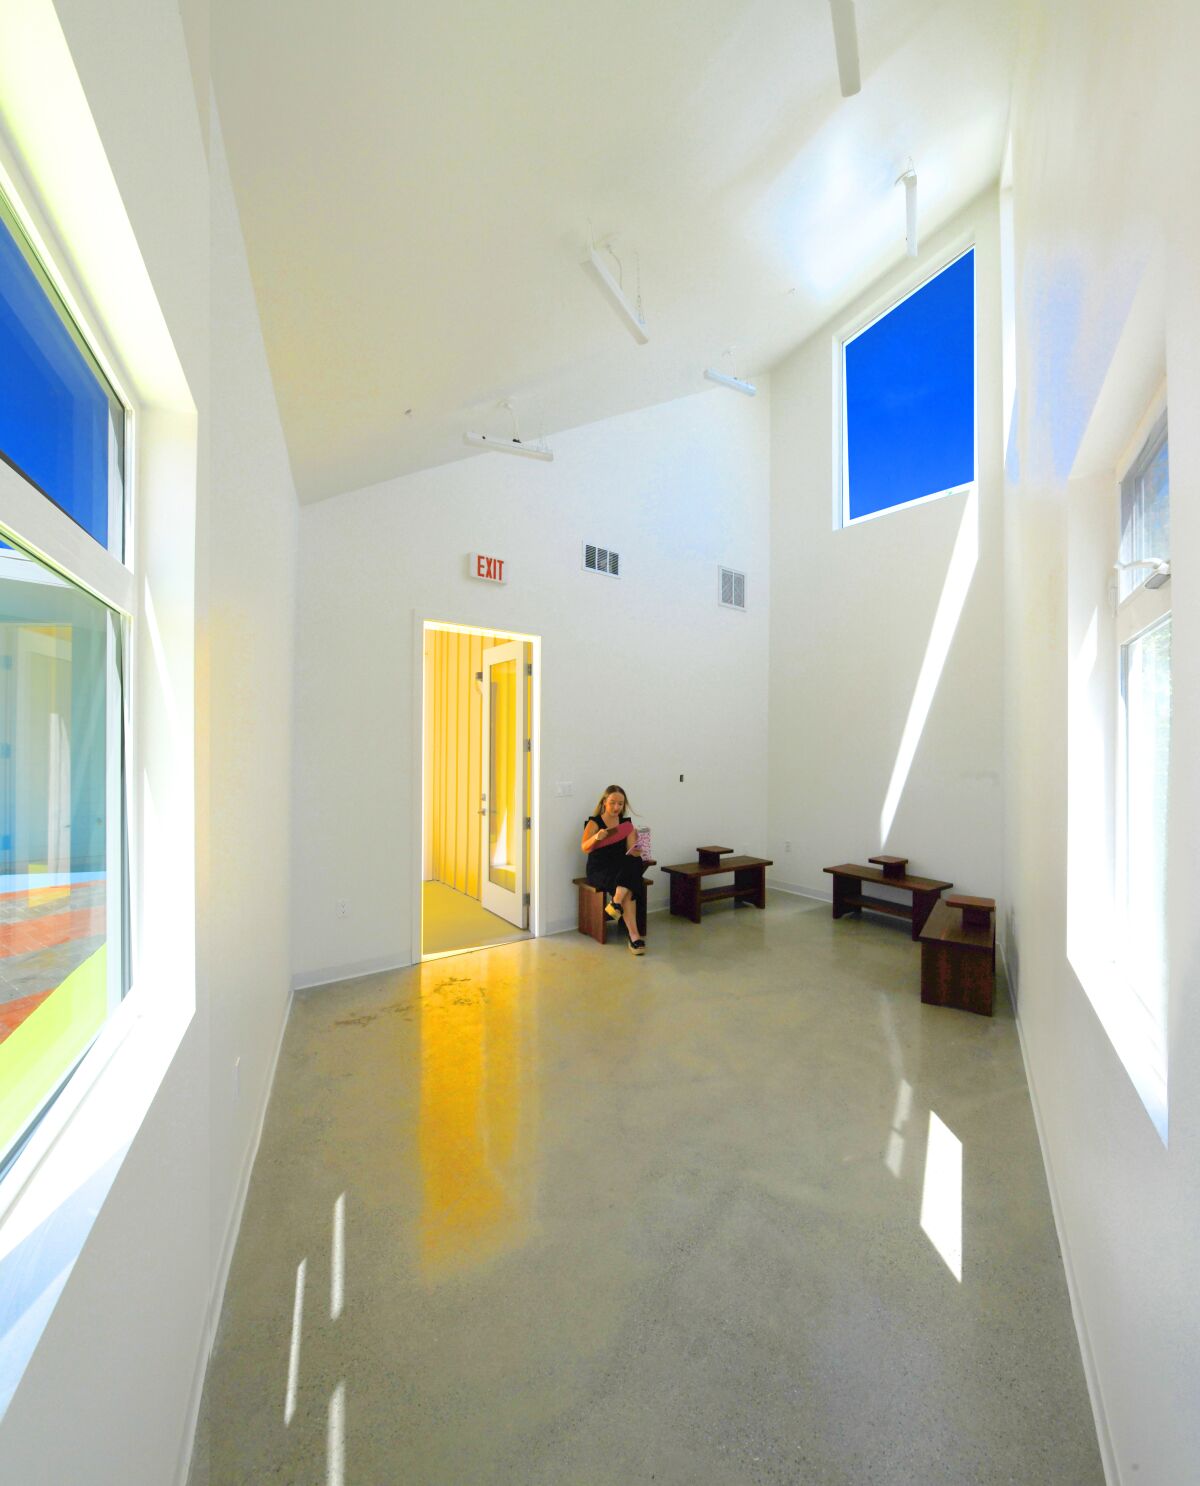 A woman sits in a room with polished concrete floors and cathedral ceilings that meet at a point on one side.